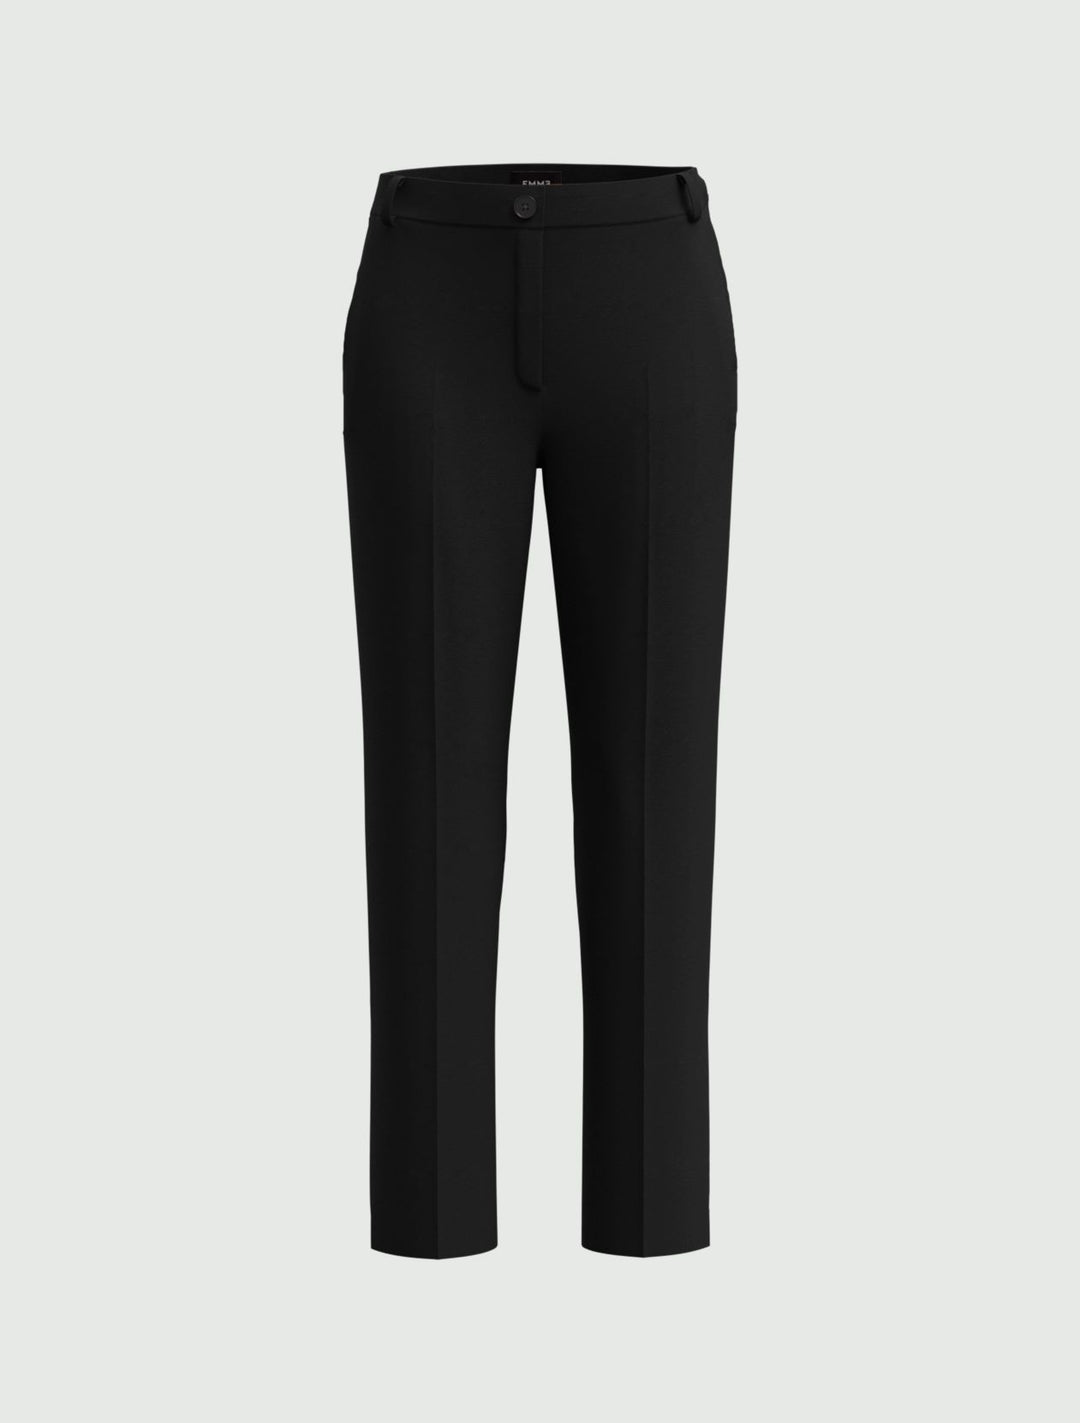 Emme Bling 51360328200 Black Trousers dotique ladies clothing chesterfield ld